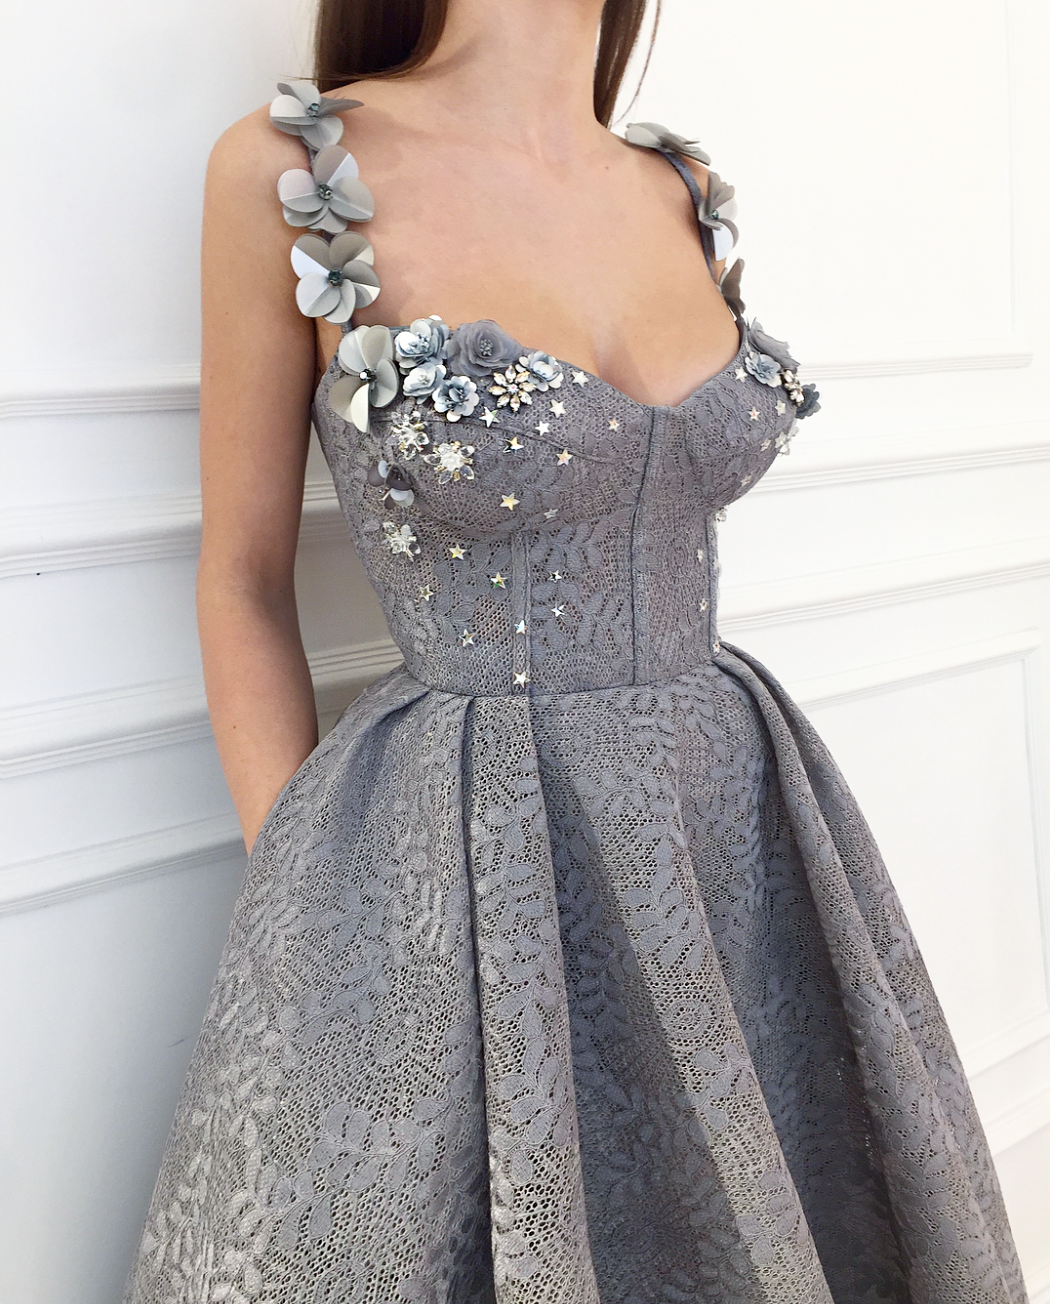 Grey A-Line dress with spaghetti straps and embroidery